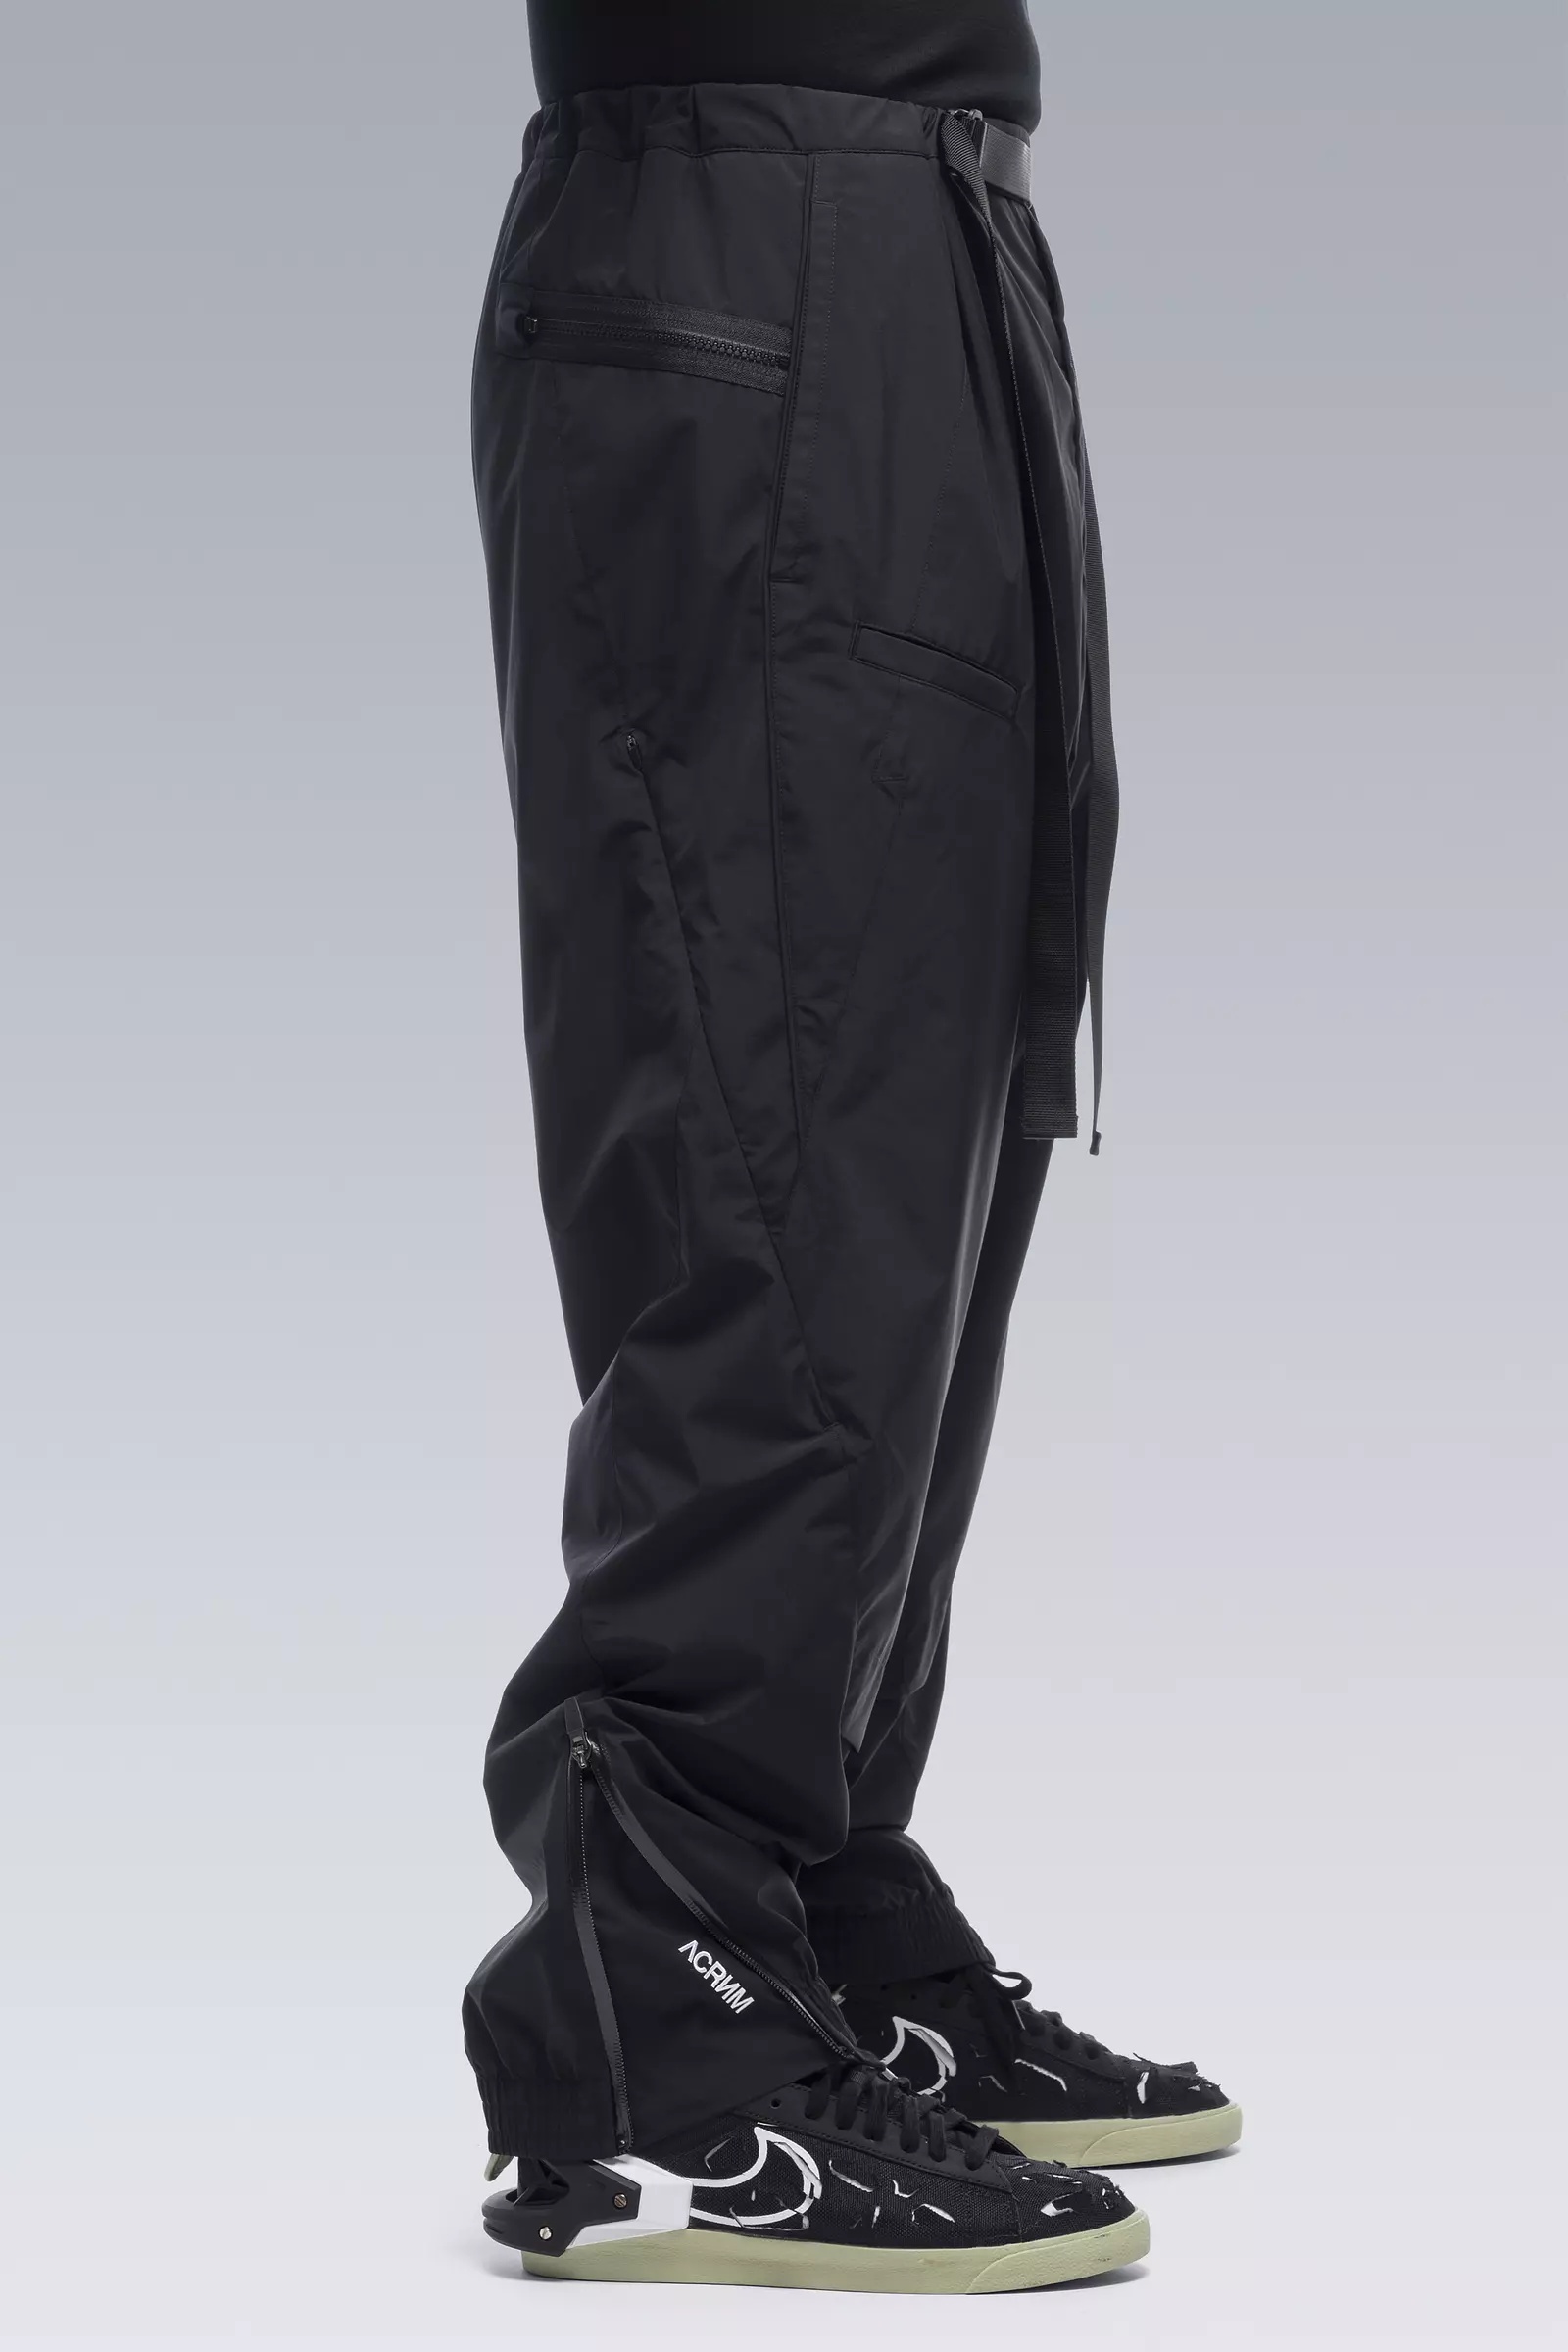 P53-WS 2L Gore-Tex® Windstopper® Insulated Vent Pants Black - 4